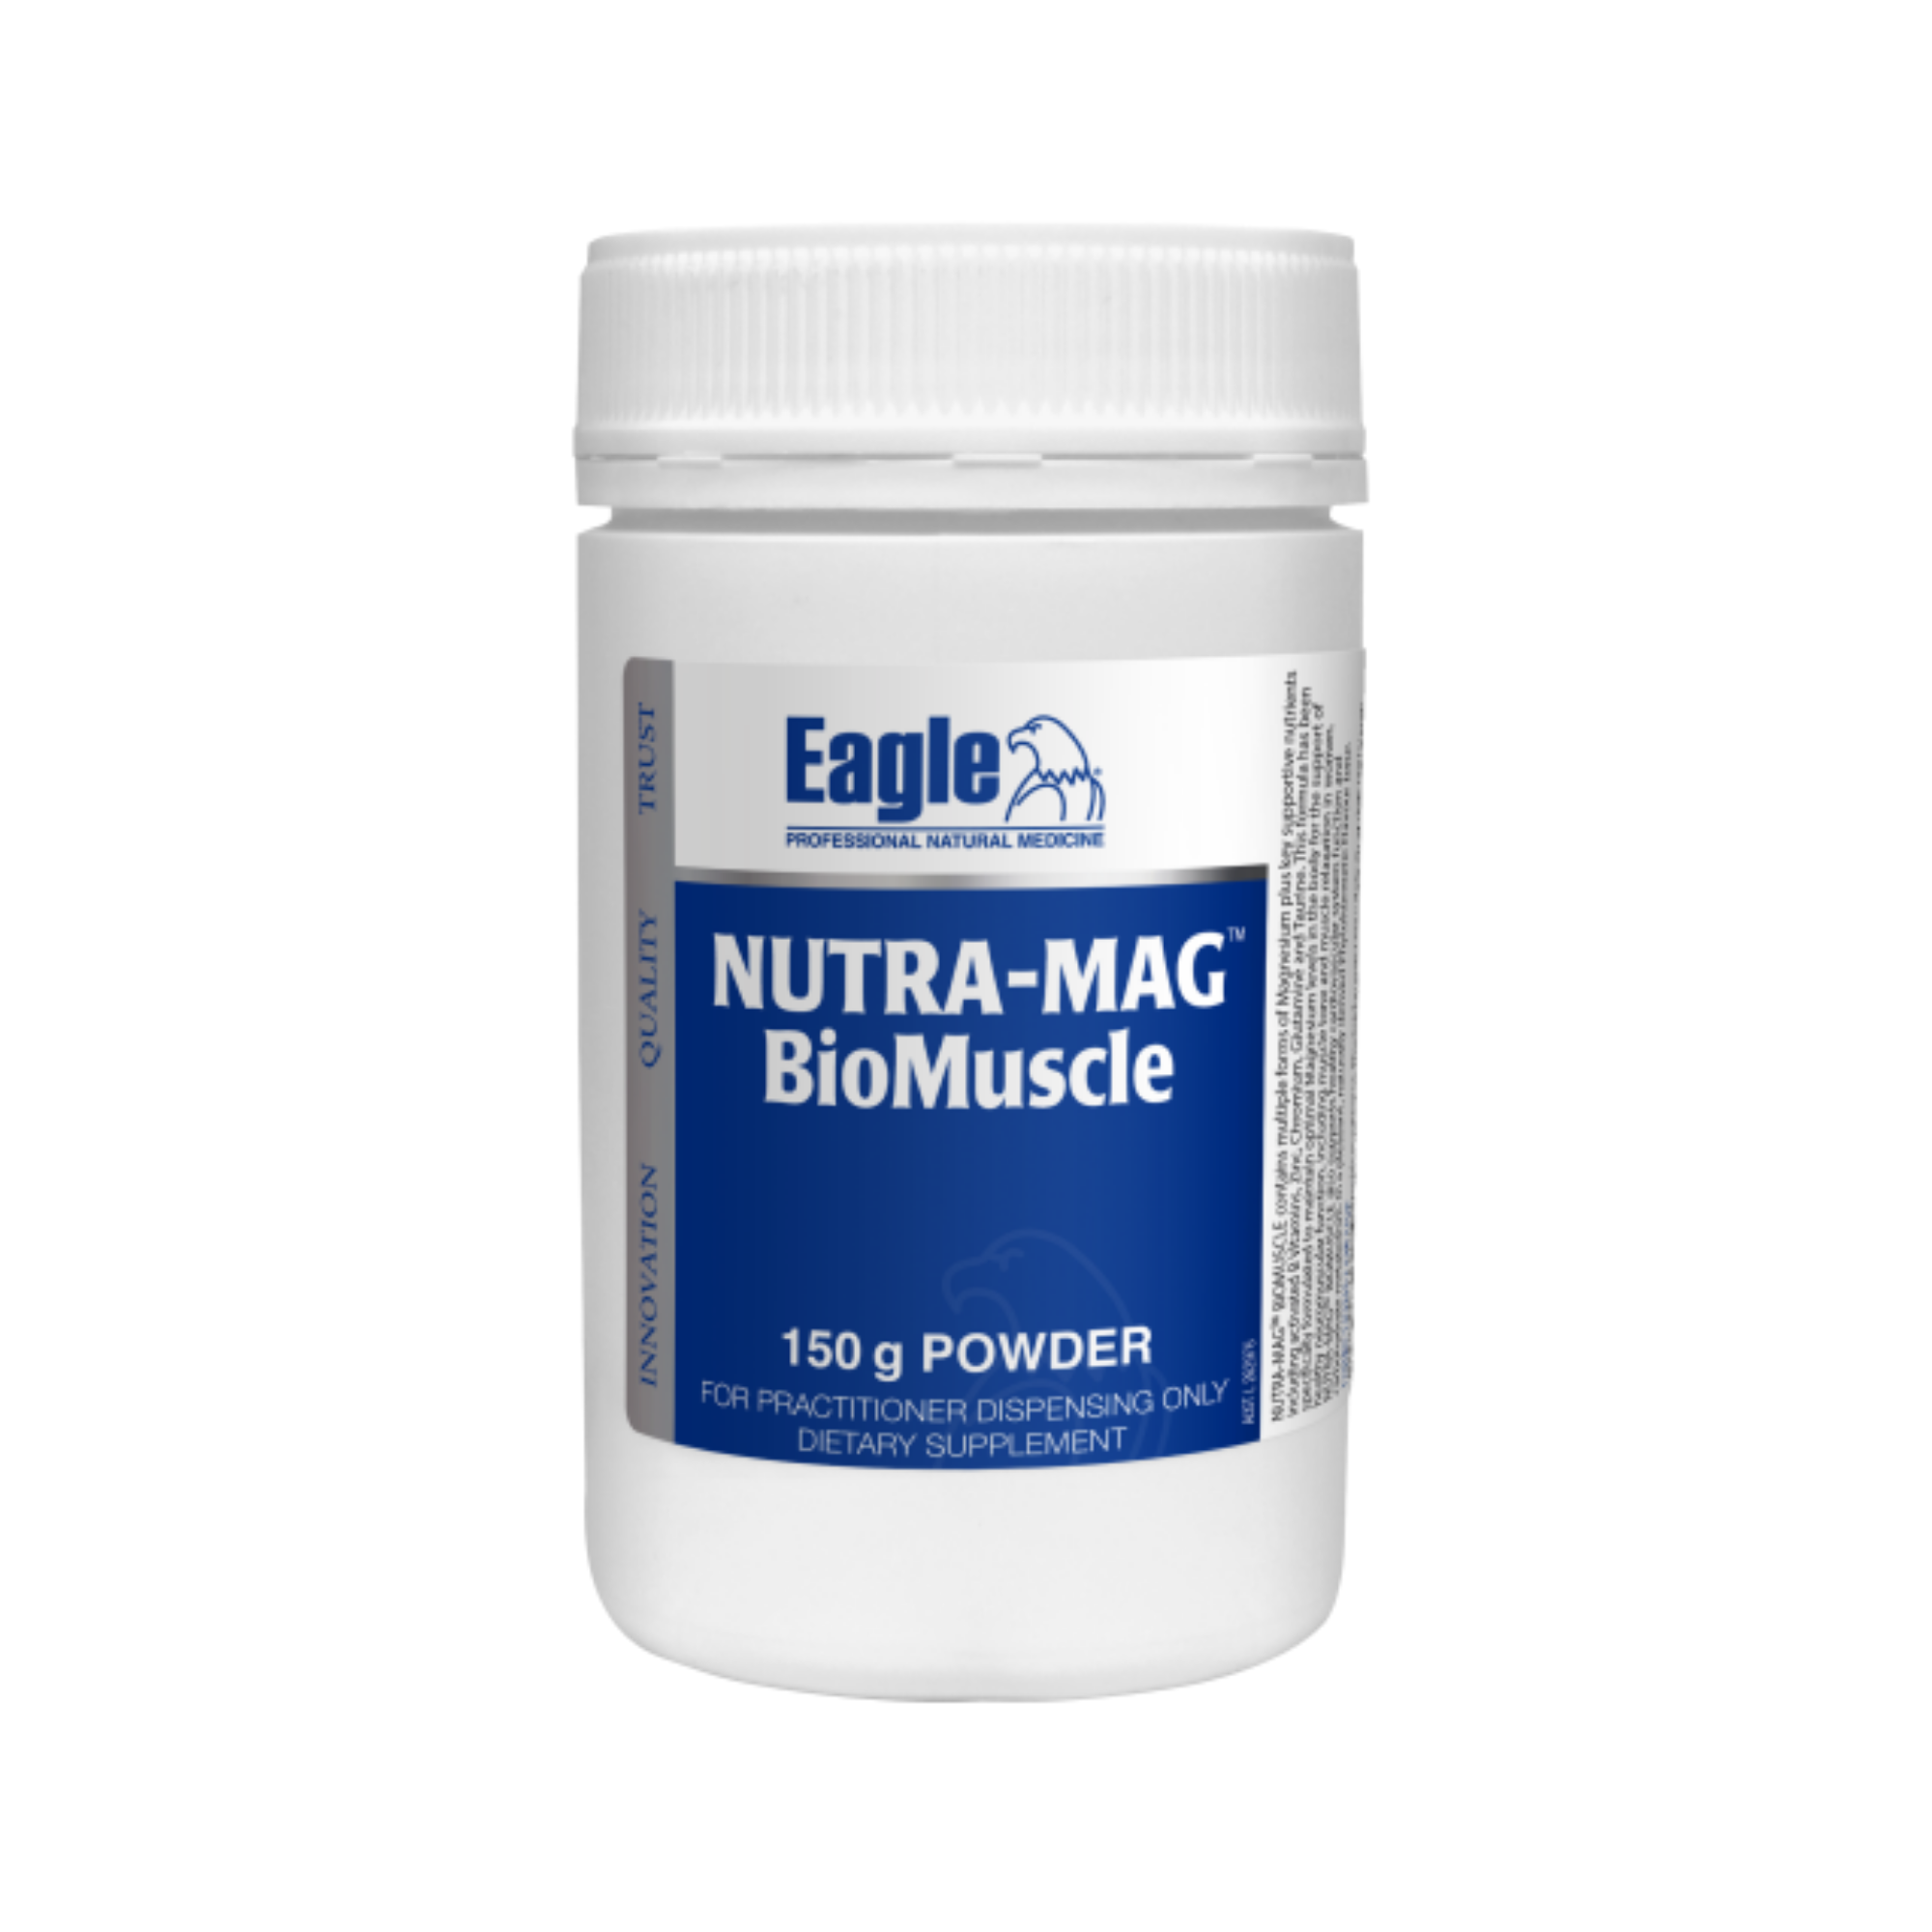 Eagle Nutra-Mag BioMuscle 150g